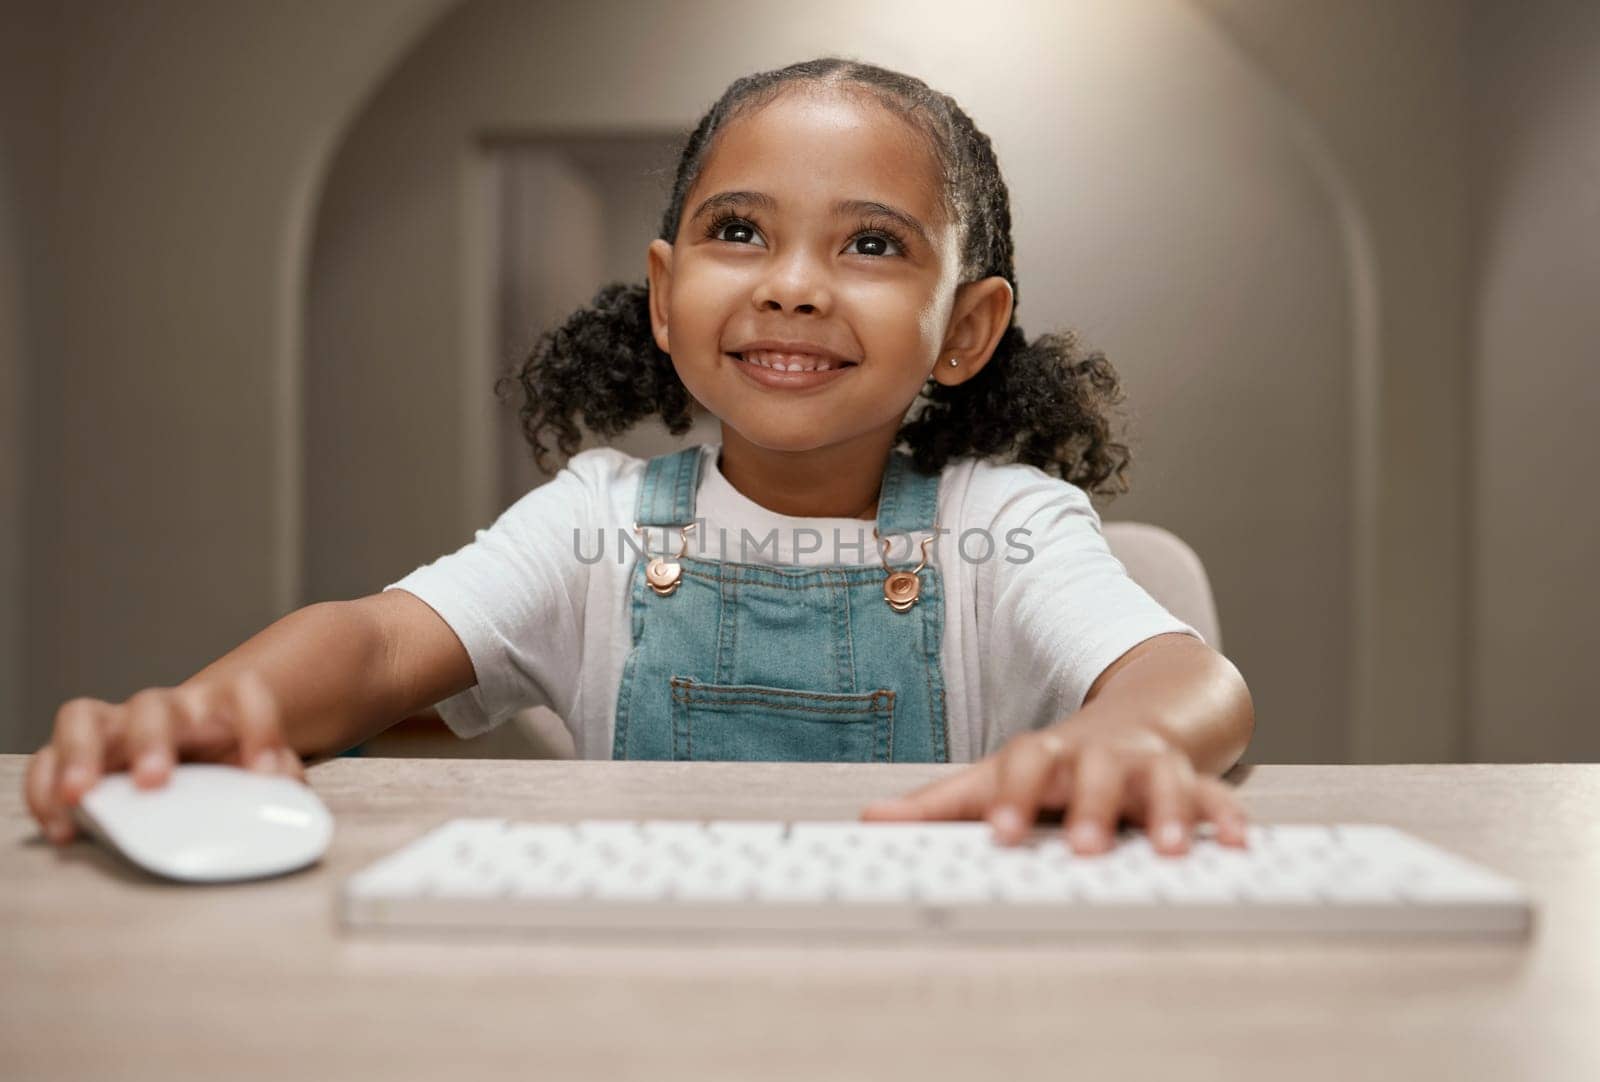 Online education, elearning and girl on computer with a smile ready for digital knowledge. Web learning, kindergarten development and kid on online course training and learning on the internet.